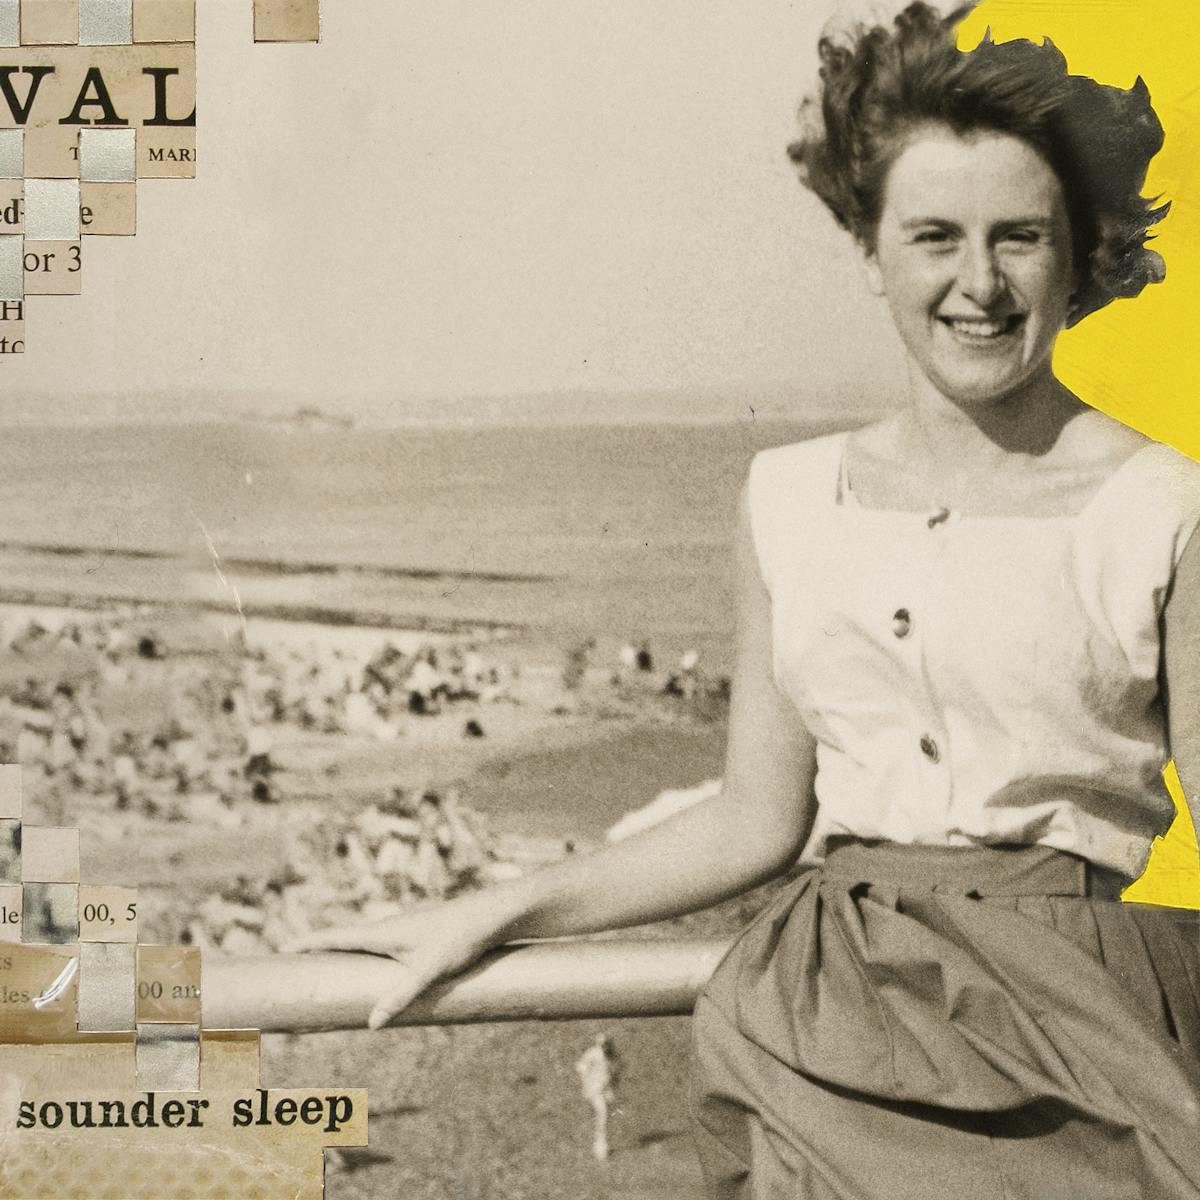 Mix media artwork made up of archive photographs and painted elements. The image shows a sepia toned photograph of a woman from the waist up standing with one arm resting on the handrail of a seaside walkway. In the distance is the horizon line of the sea meeting the sky and small distant figures on the sunlit sandy beach. The woman is smiling to the camera in a relaxed manner, her hair and skirt being blown by the wind. She is wearing a white sleeveless blouse. Behind her to the right the background of the photograph has been painted over with bright yellow textured paint above the handrail and light orange below. To the left of the image the beach scene is cut into strips and physically latticed into another archive photograph of an advert for a drug. The words 'Distaval' can be made out at the top and at the bottom the words, 'safe sedation' and 'sounder sleep'.  Resting on top of the advert are 3 white tablets in a transparent packet. 